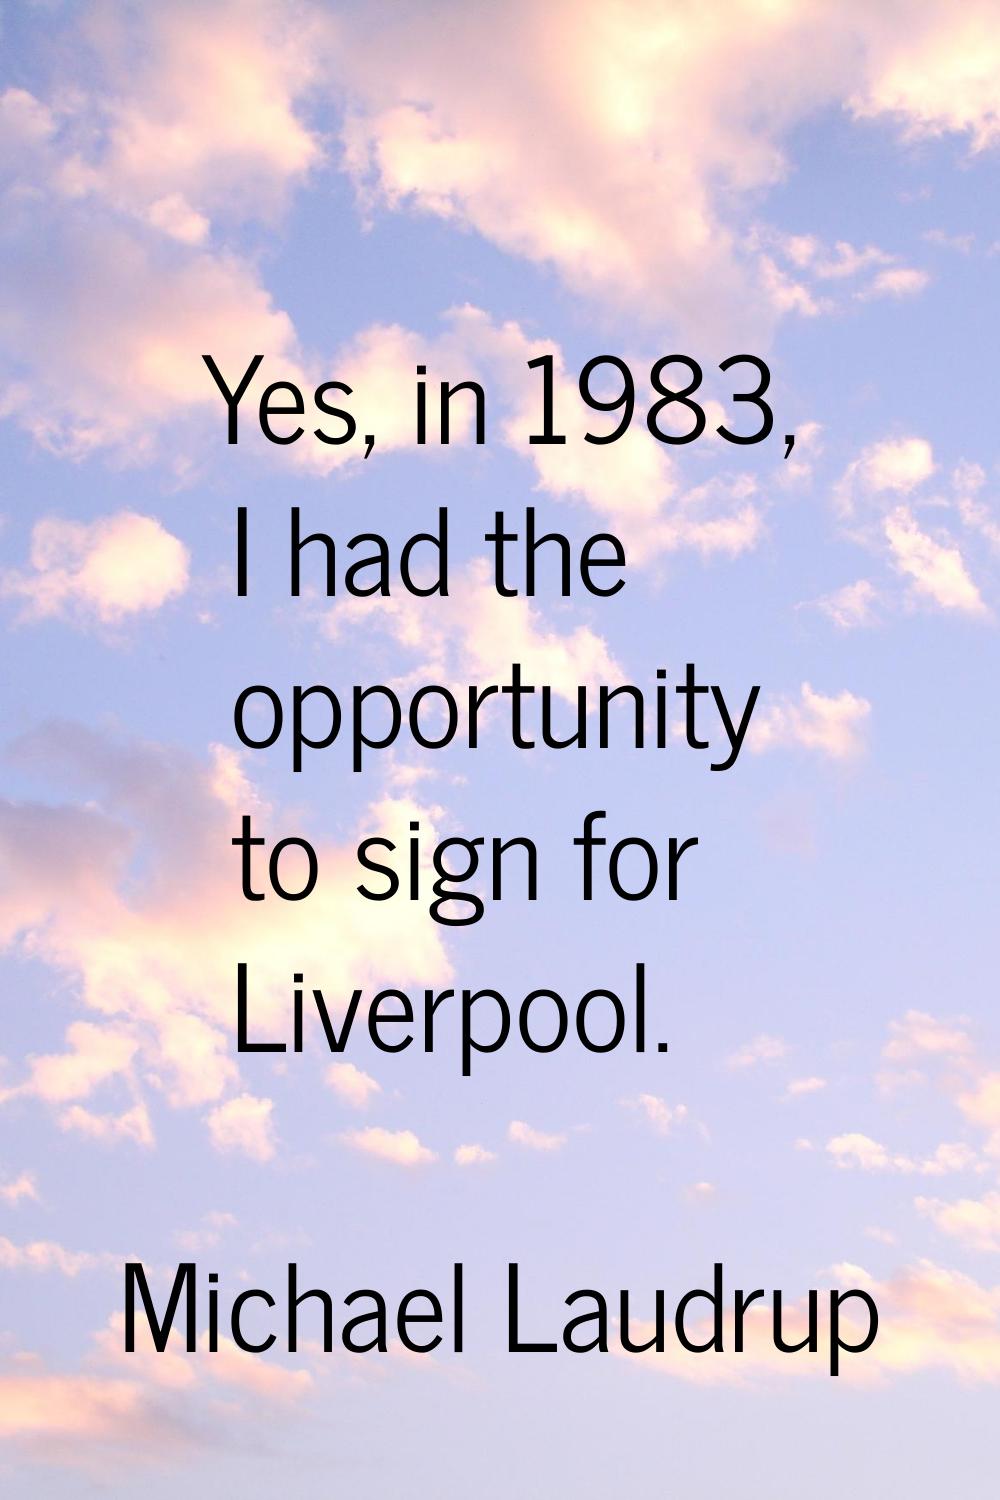 Yes, in 1983, I had the opportunity to sign for Liverpool.